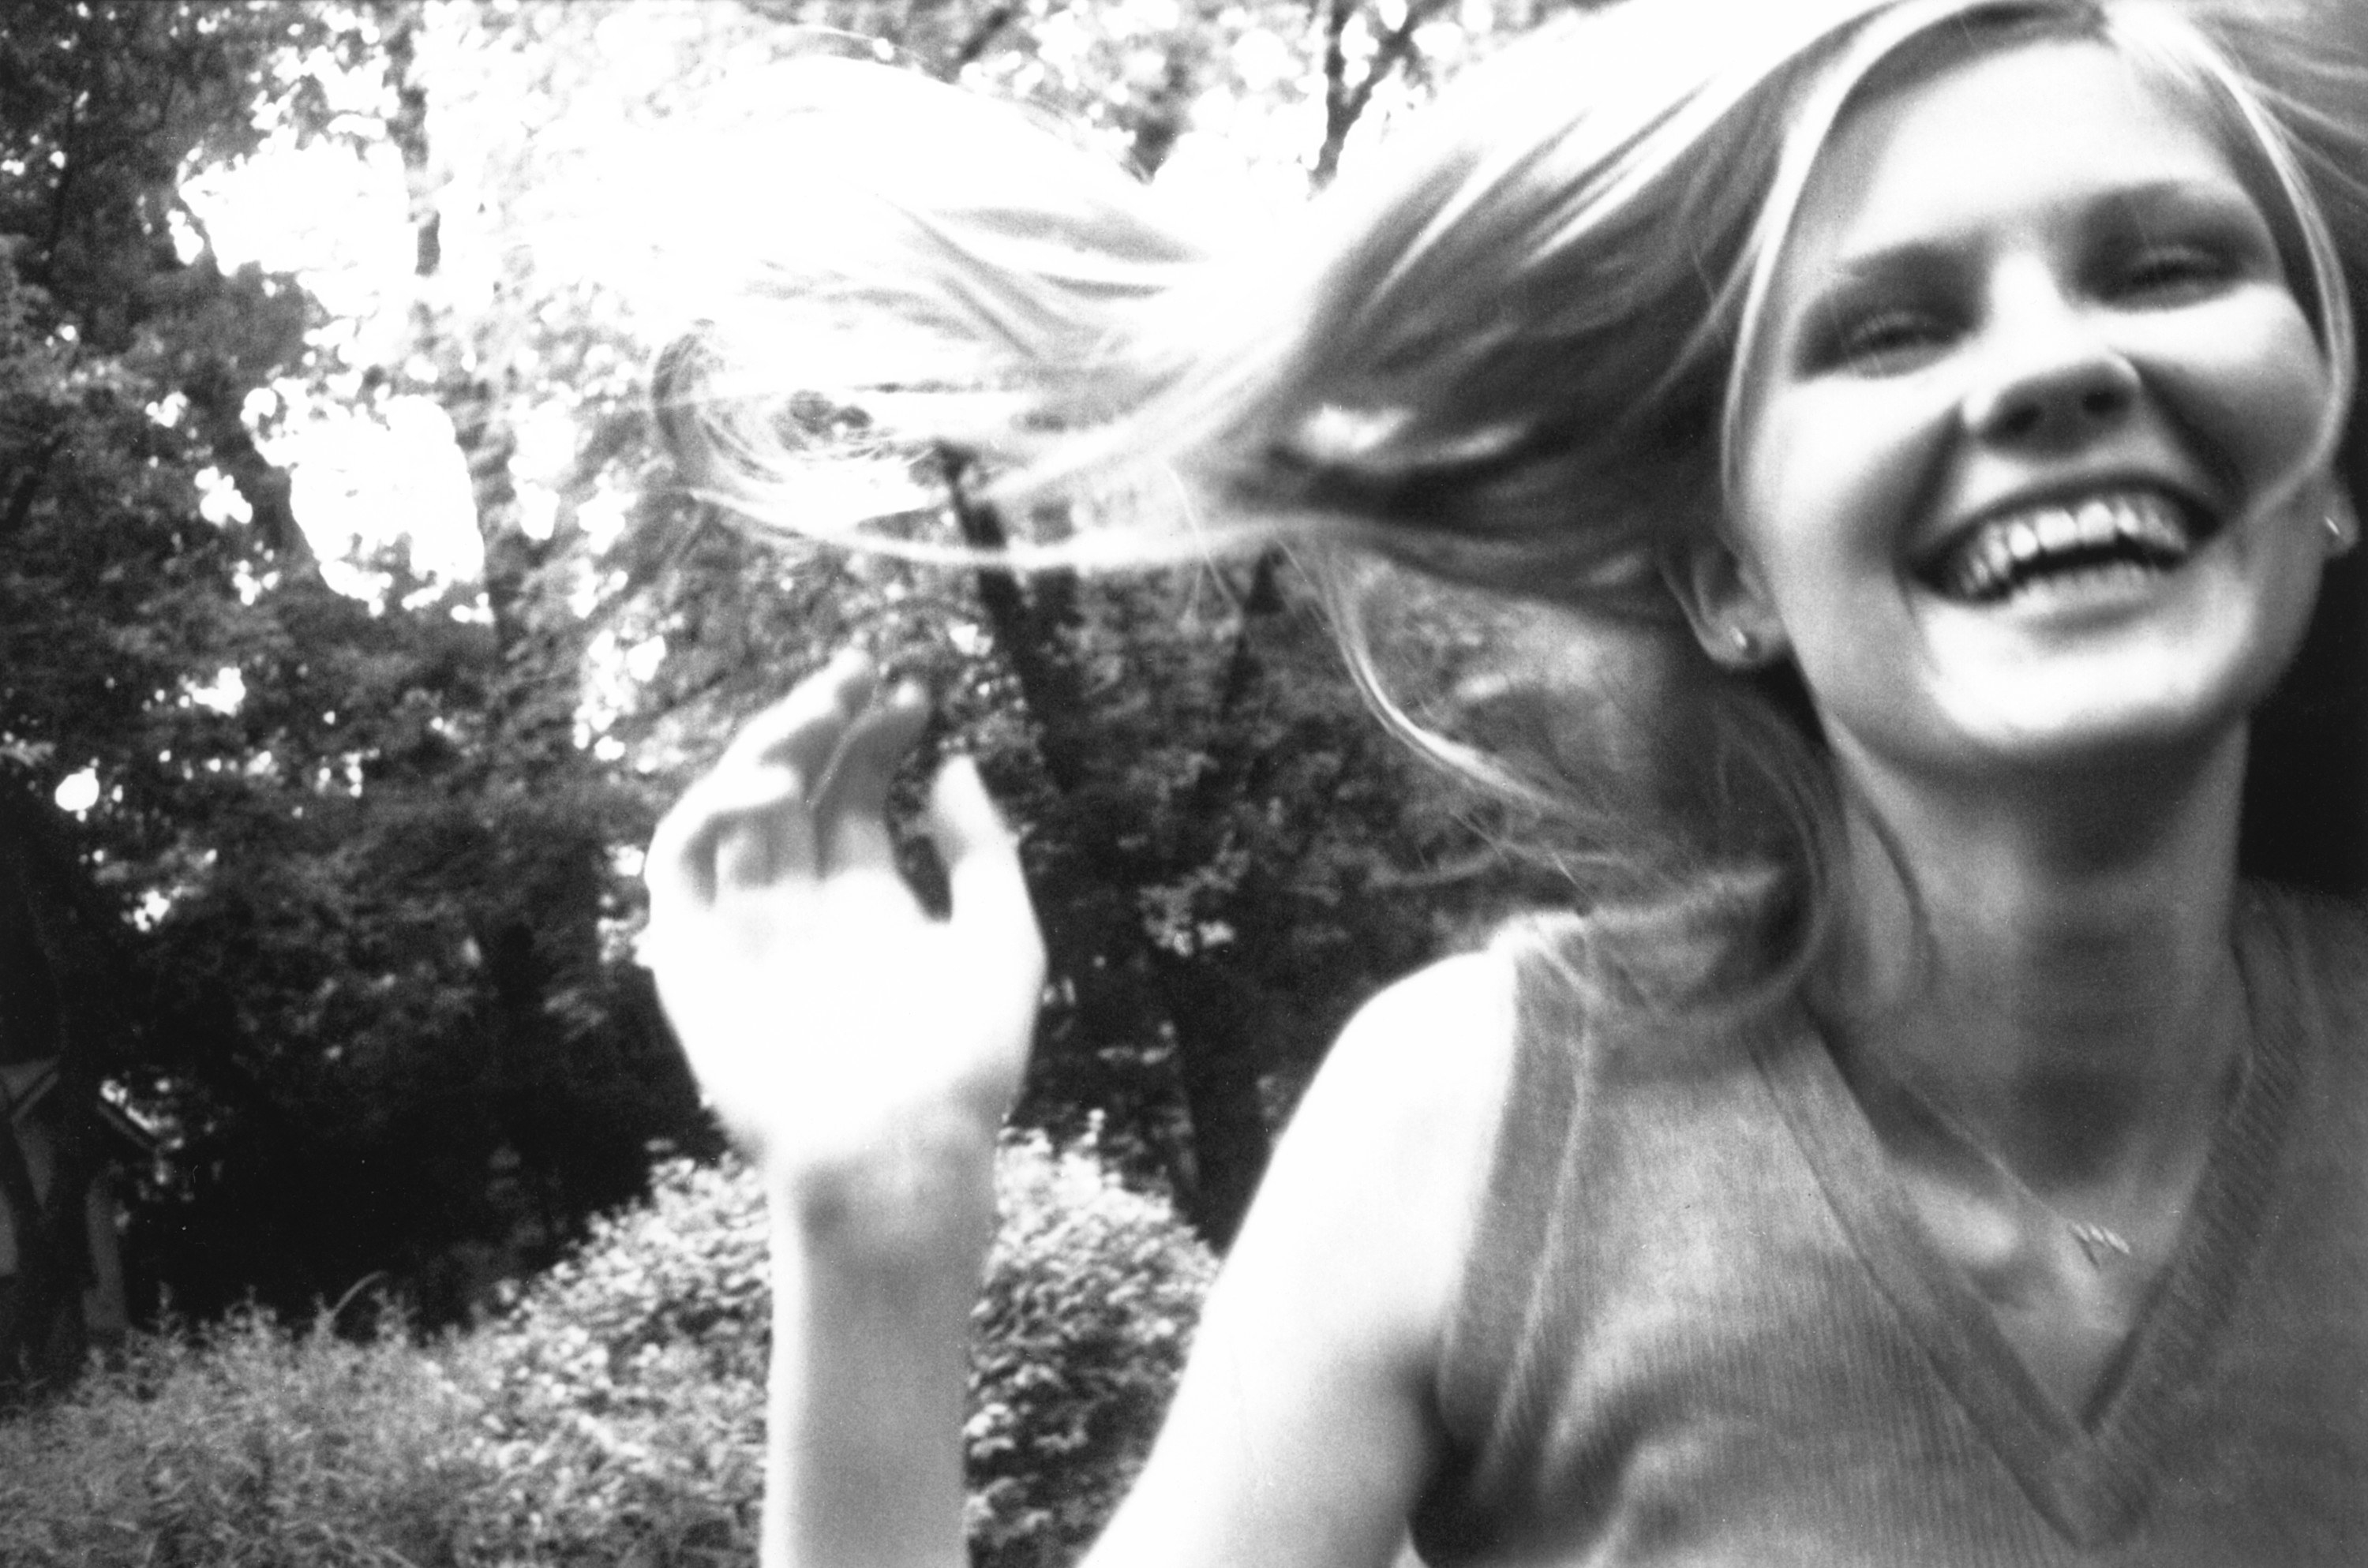 Dunst smiles with her hand up and her hair blowing in the wind with trees in the background